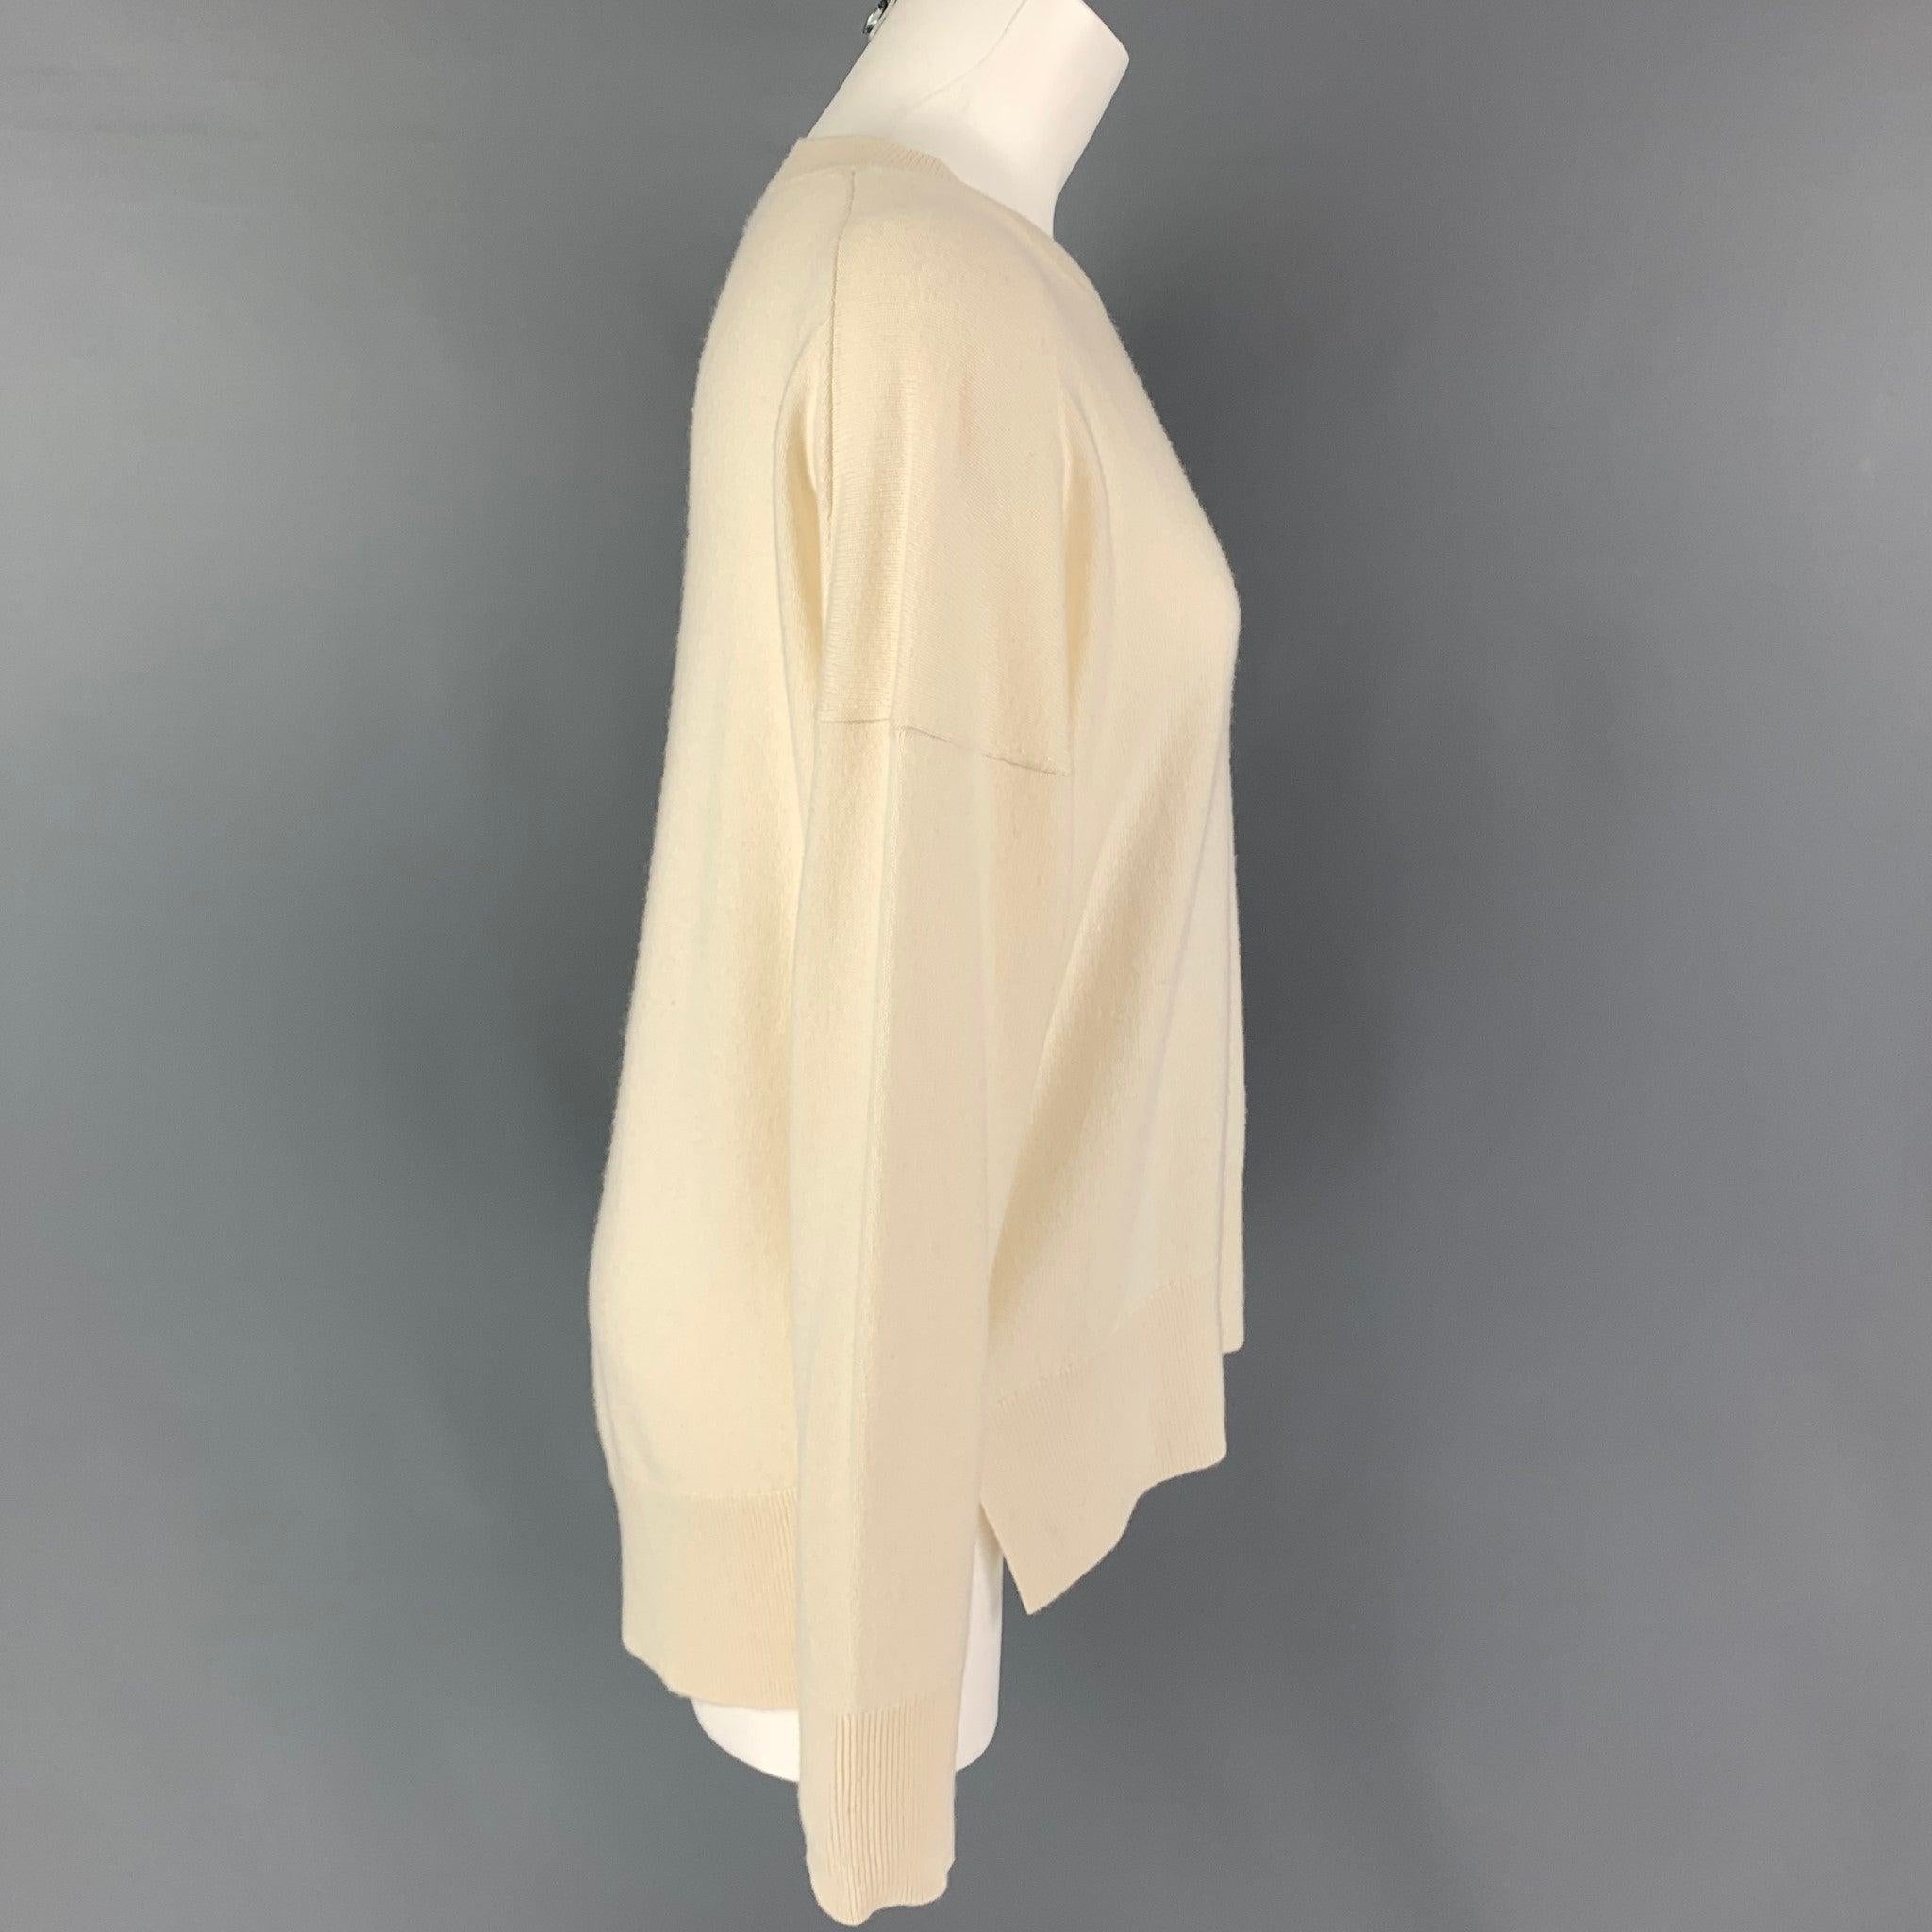 THEORY sweater comes in a cream cashmere featuring a crew-neck and side slits.
Very Good
Pre-Owned Condition. 

Marked:   L  

Measurements: 
 
Shoulder:
26 inches  Bust: 46 inches  Sleeve: 21 inches  Length: 28.5 inches 
  
  
 
Reference: